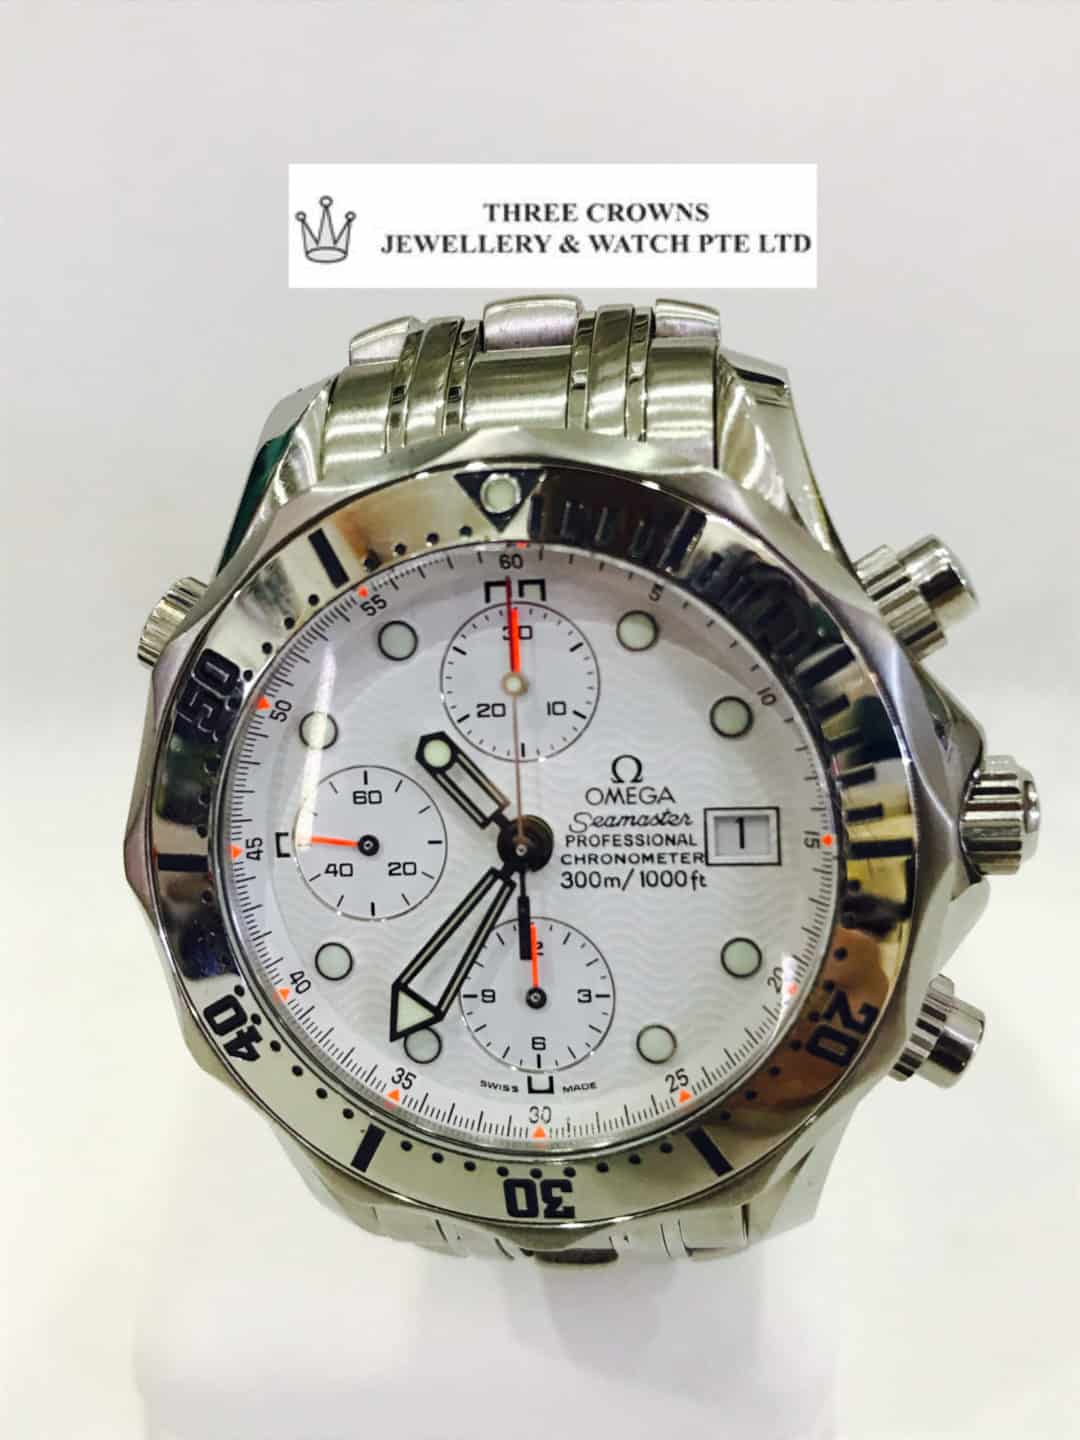 Omega seamaster Chronograph watch - Buy and Sell used Rolex Watches and